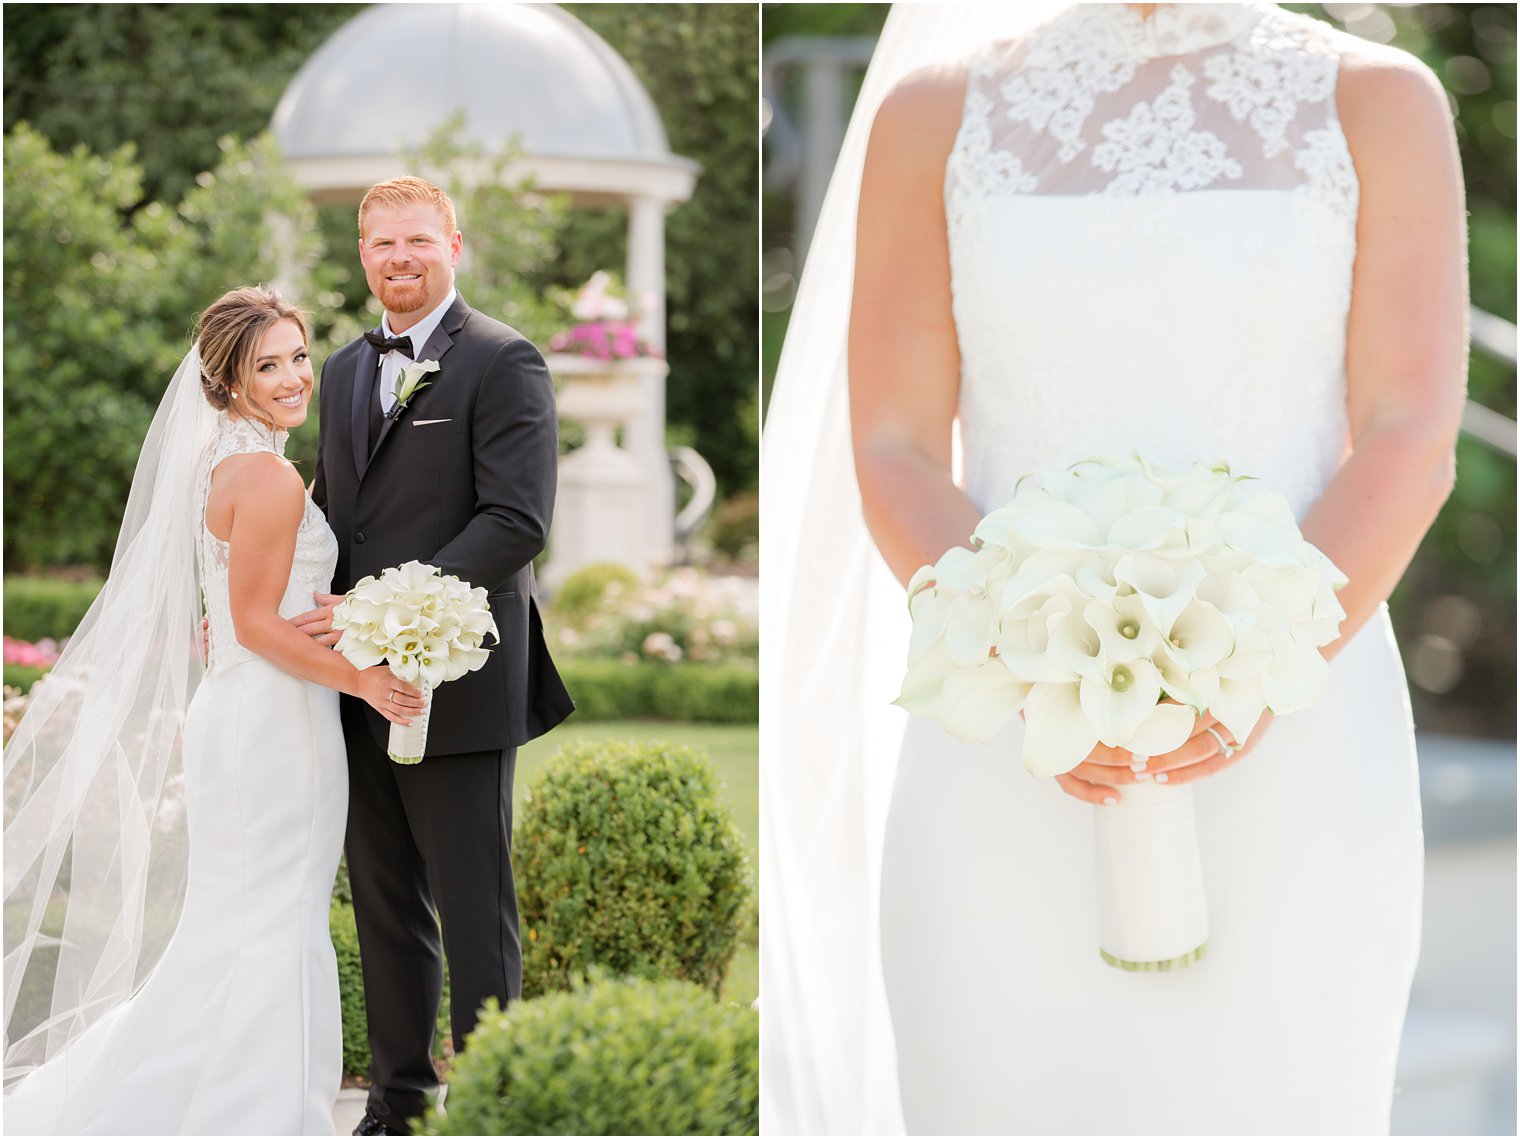 Wedding portraits at Park Chateau Estate and Gardens